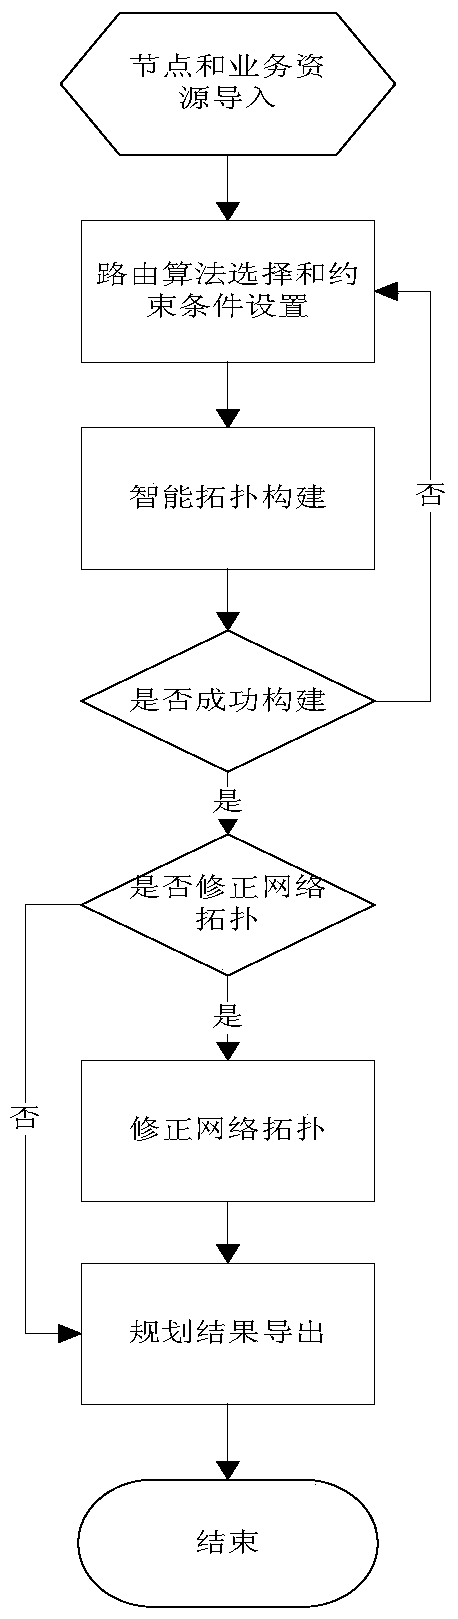 Computer Automatic Construction Method of Optical Network Topology